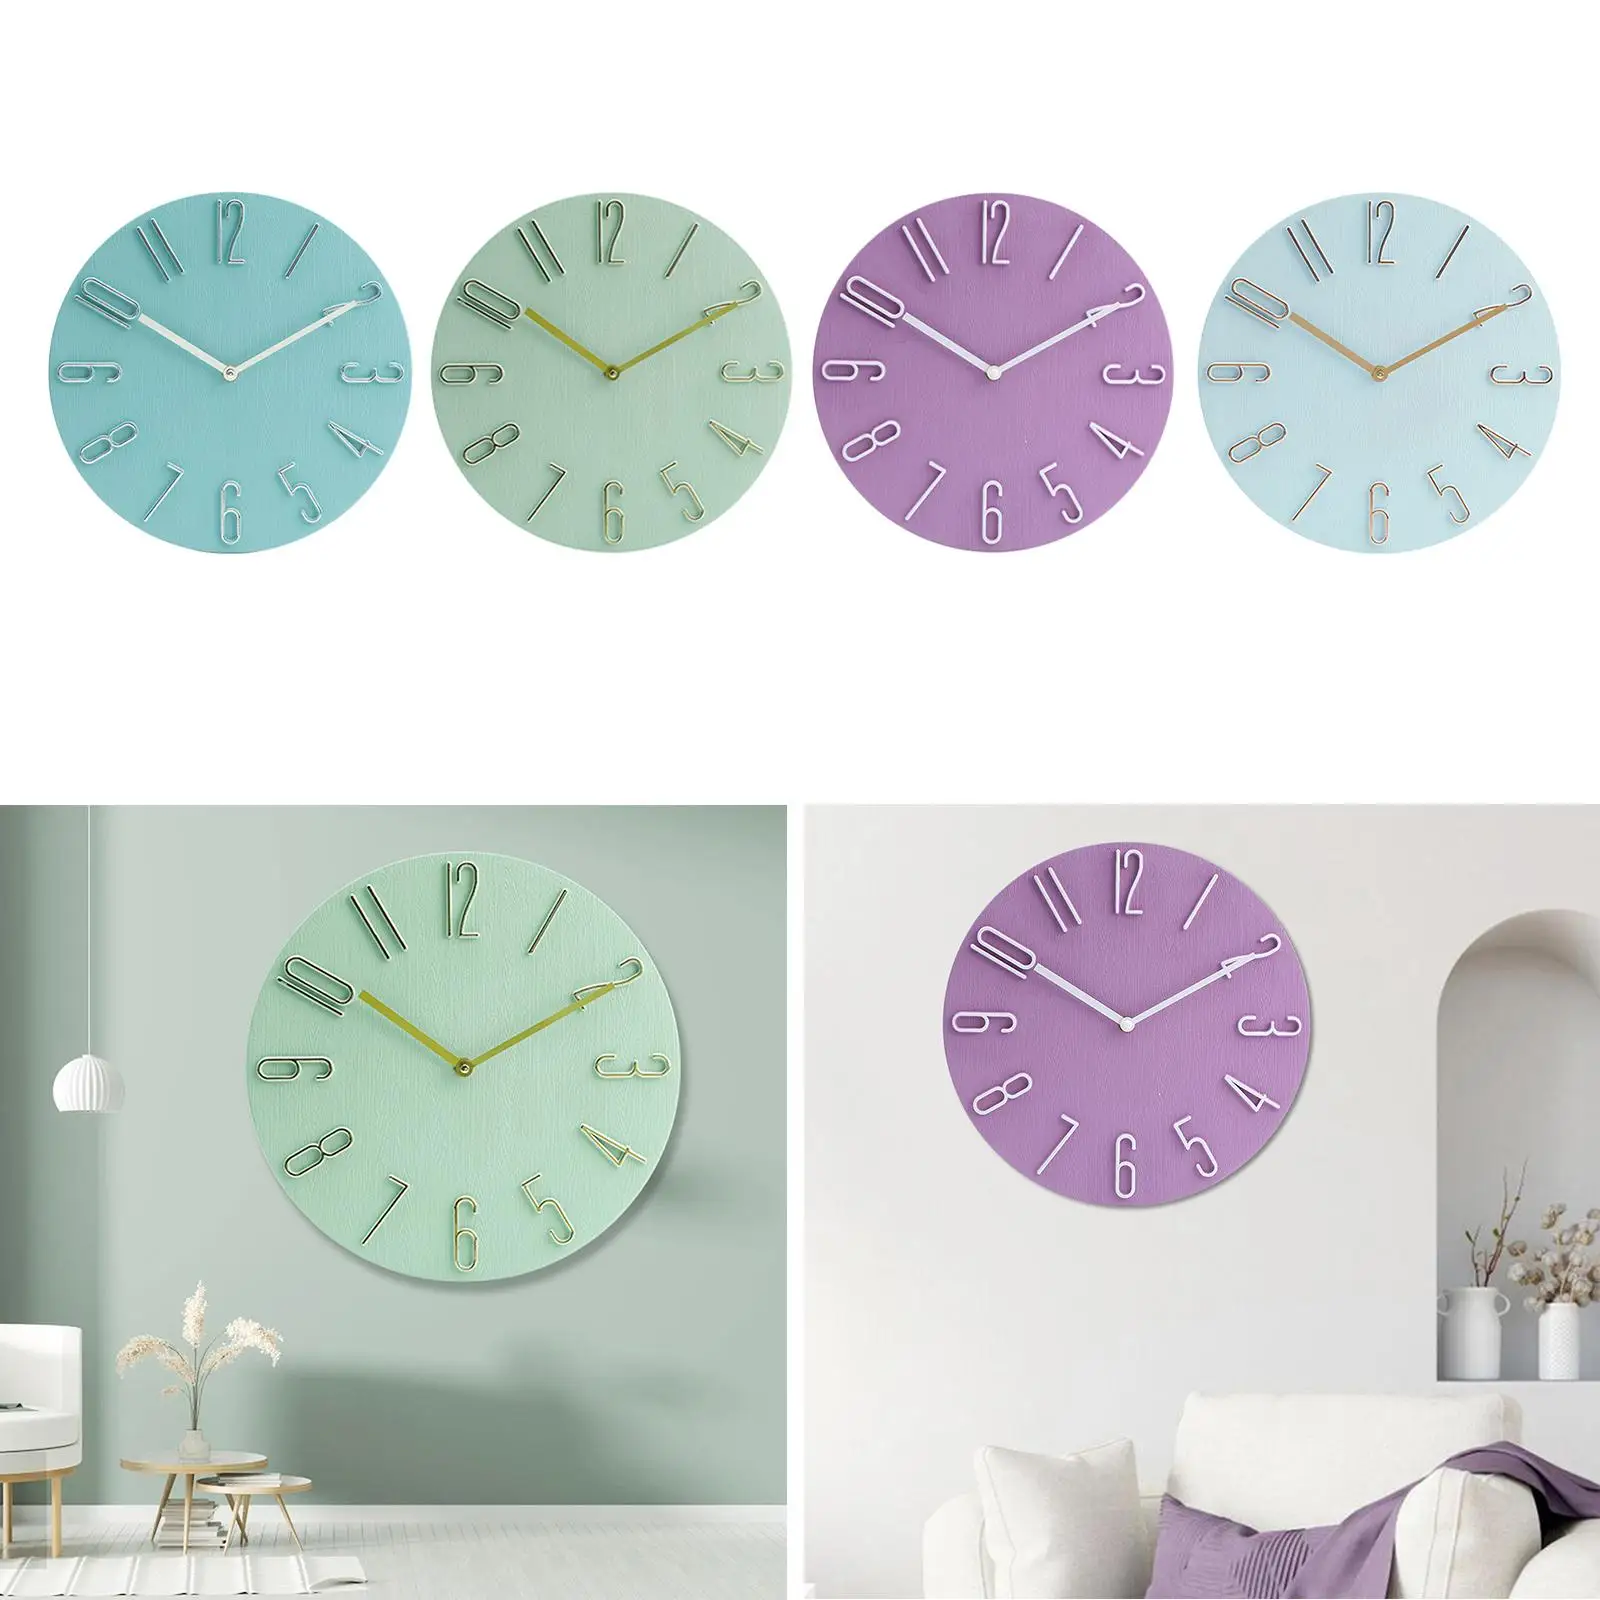 Nordic 3D Plastic Large Wall Clock Modern Design Home Decor Bedroom Silent Watch Wall Kids Clock for Children Room Cafe Decor